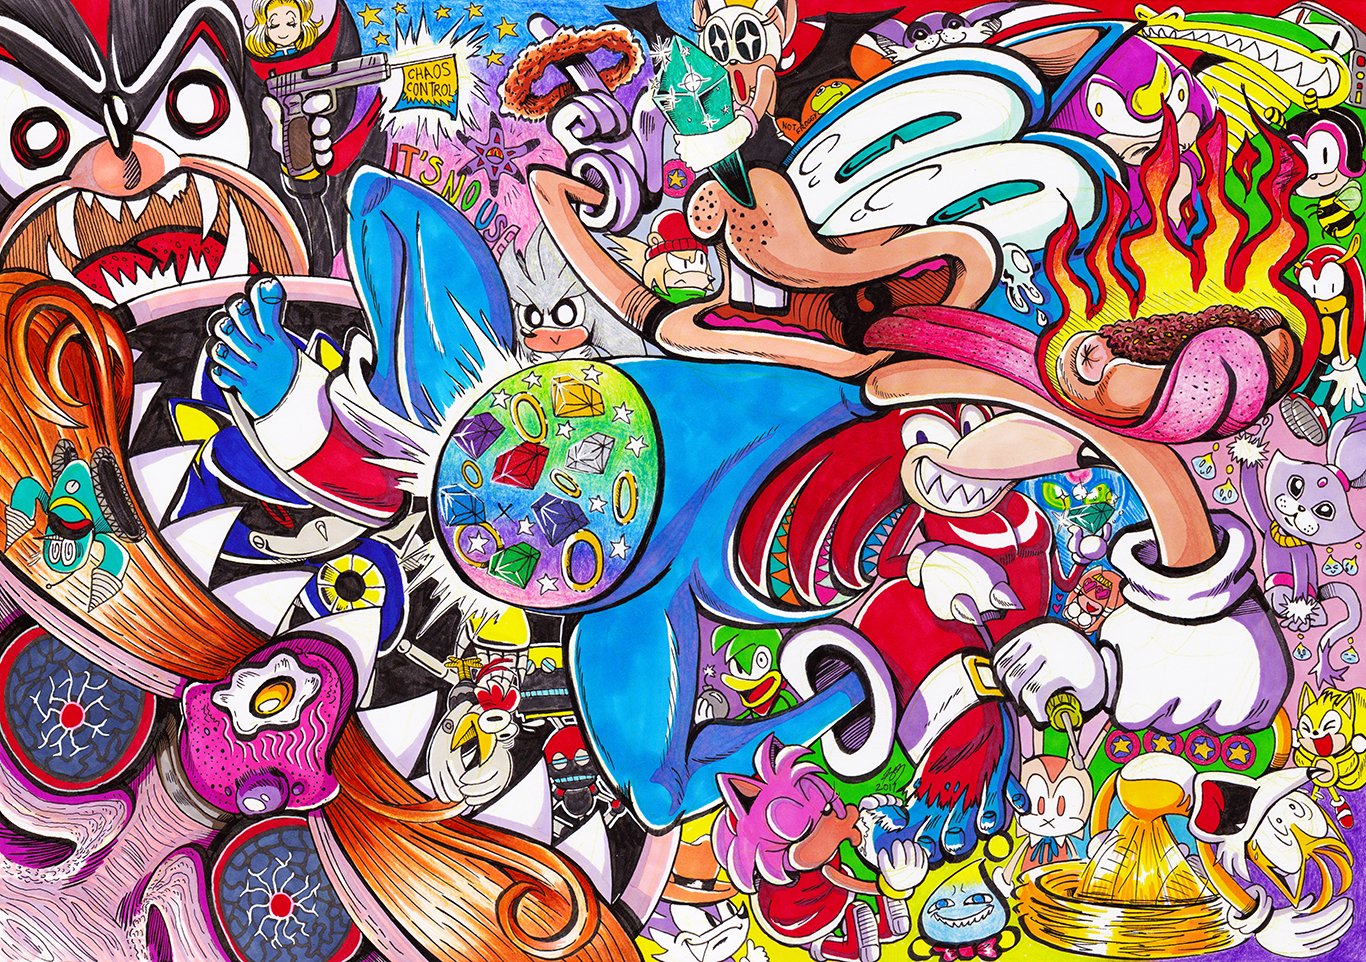 A very psychedelic and manic interpretation of Sonic the Hedgehog and all major main and minor characters from the games in a mix of different art styles. Very colourful.